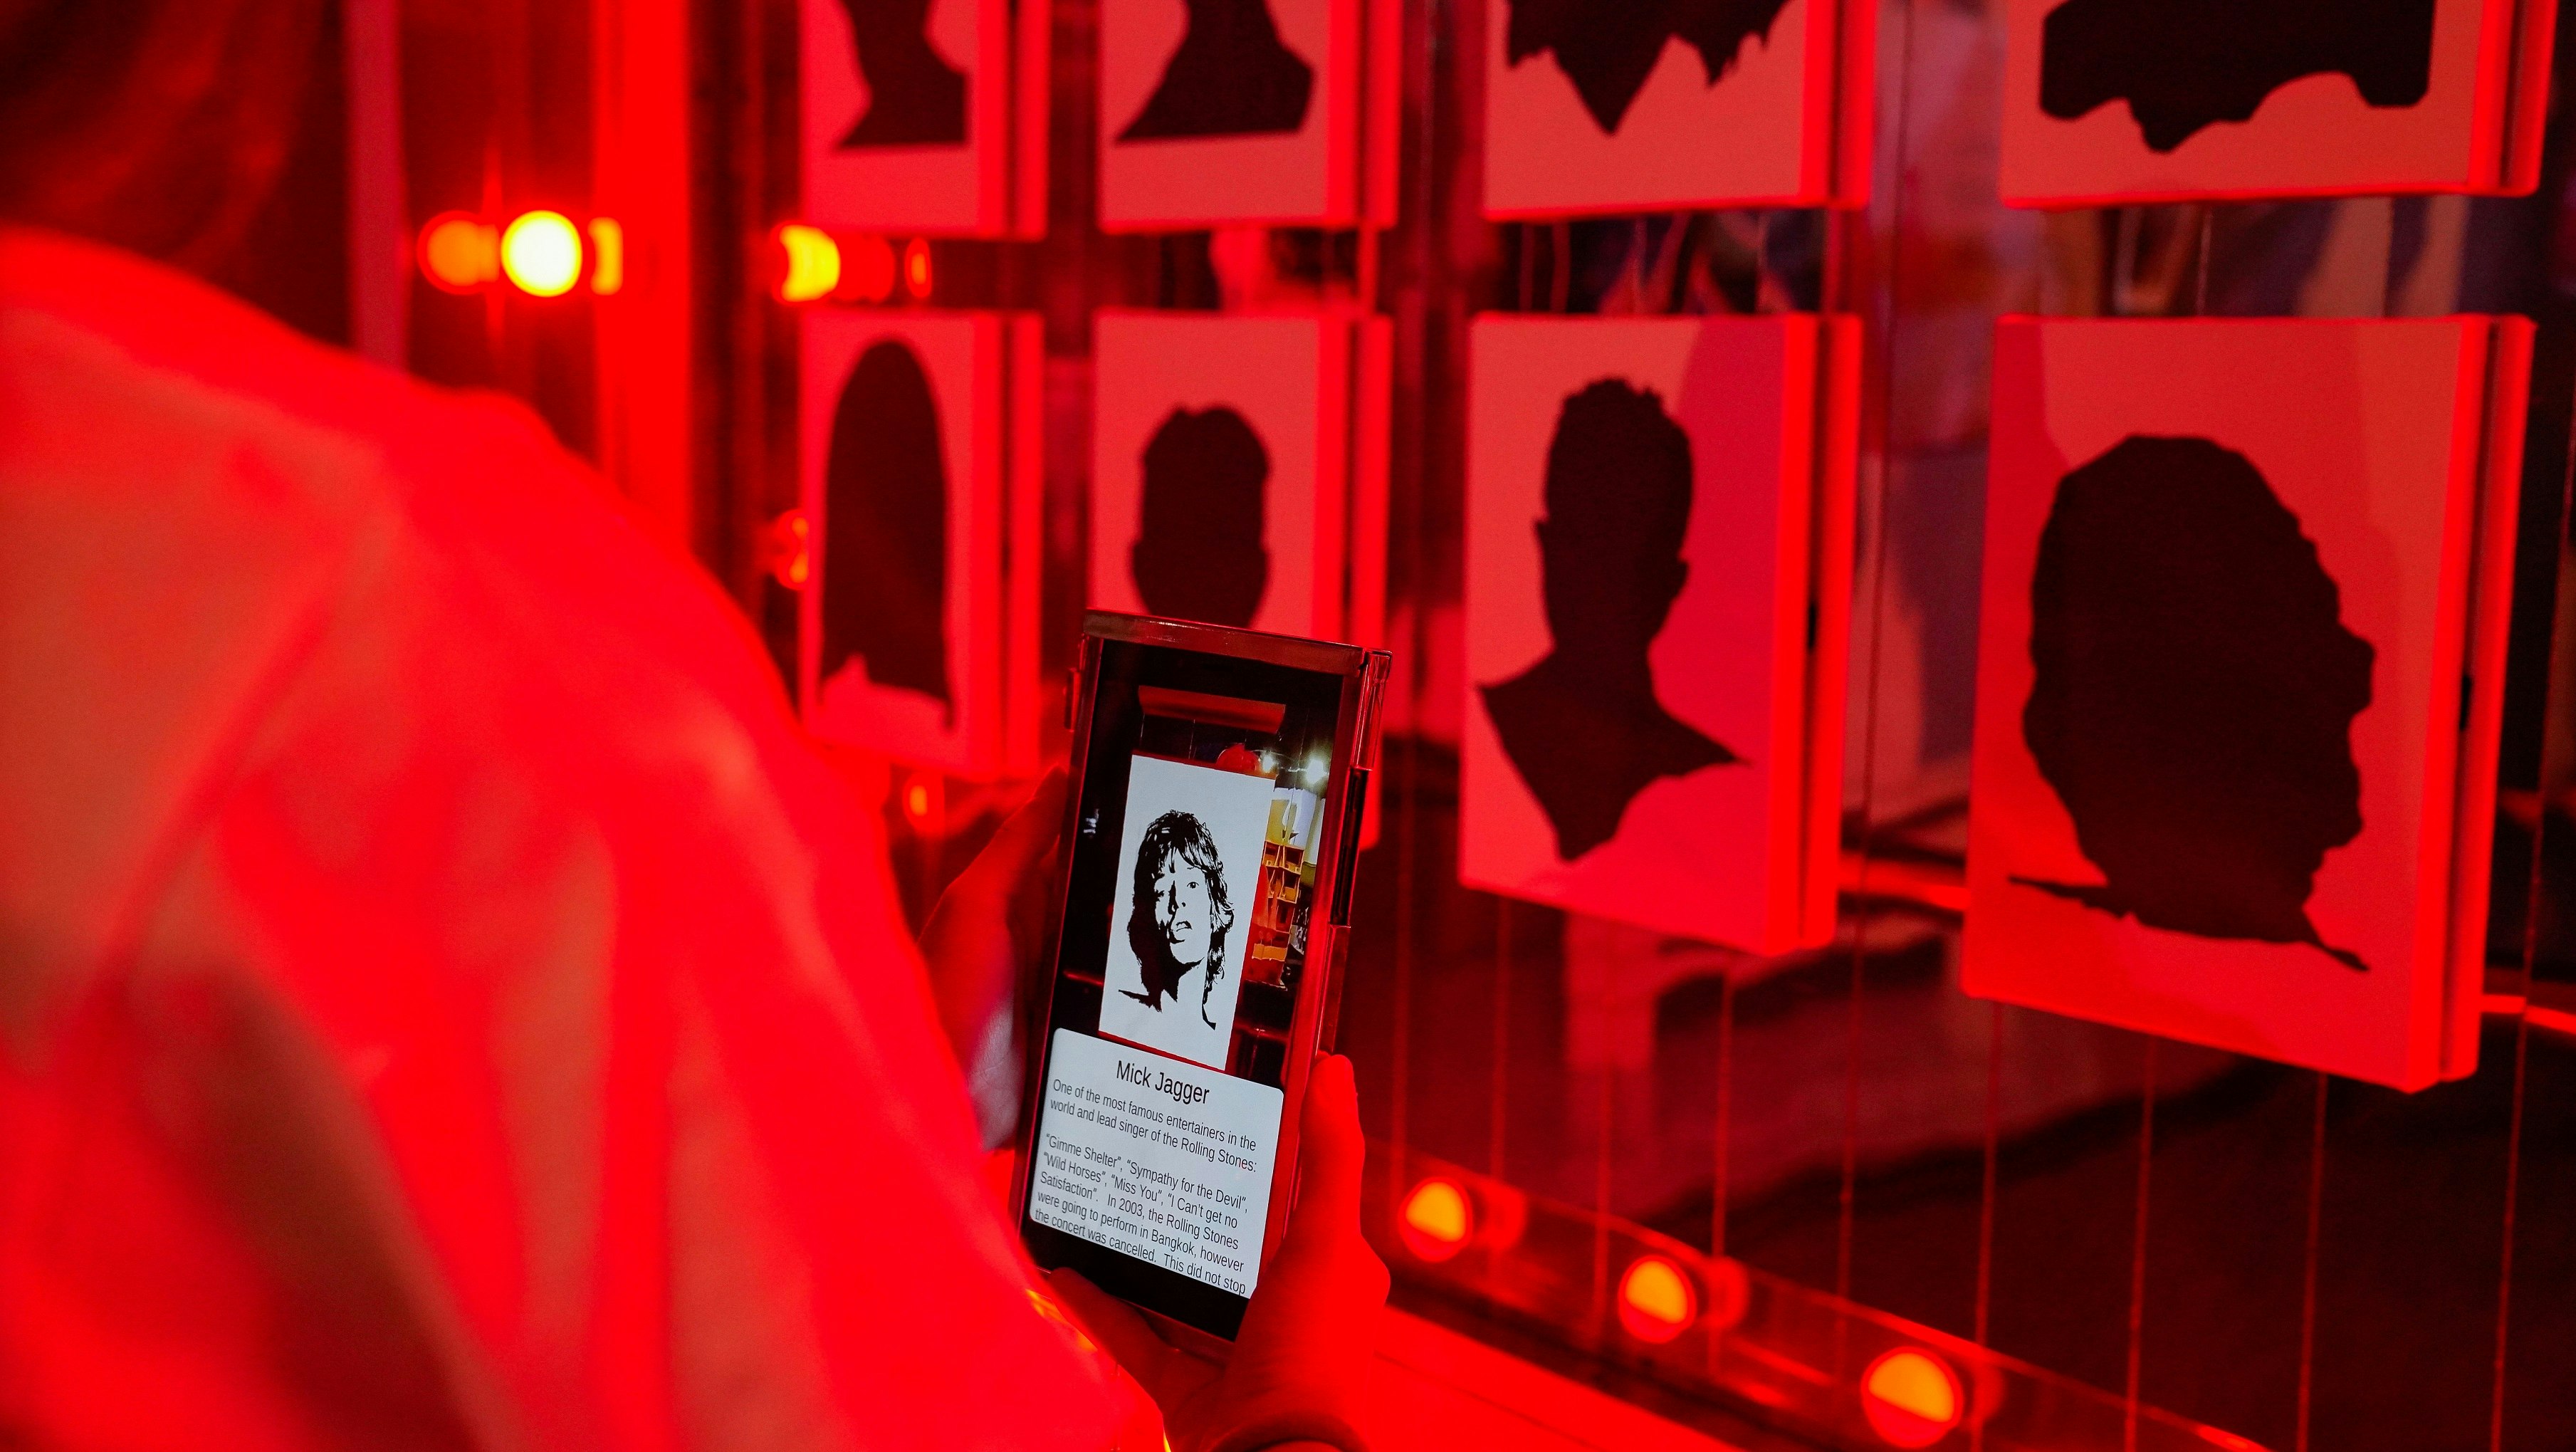 The wall of fame in the Patpong Museum. A visitor holds up a mobile phone to uncover who the silhouette on the wall belongs to. In this instance it is Mick Jagger.